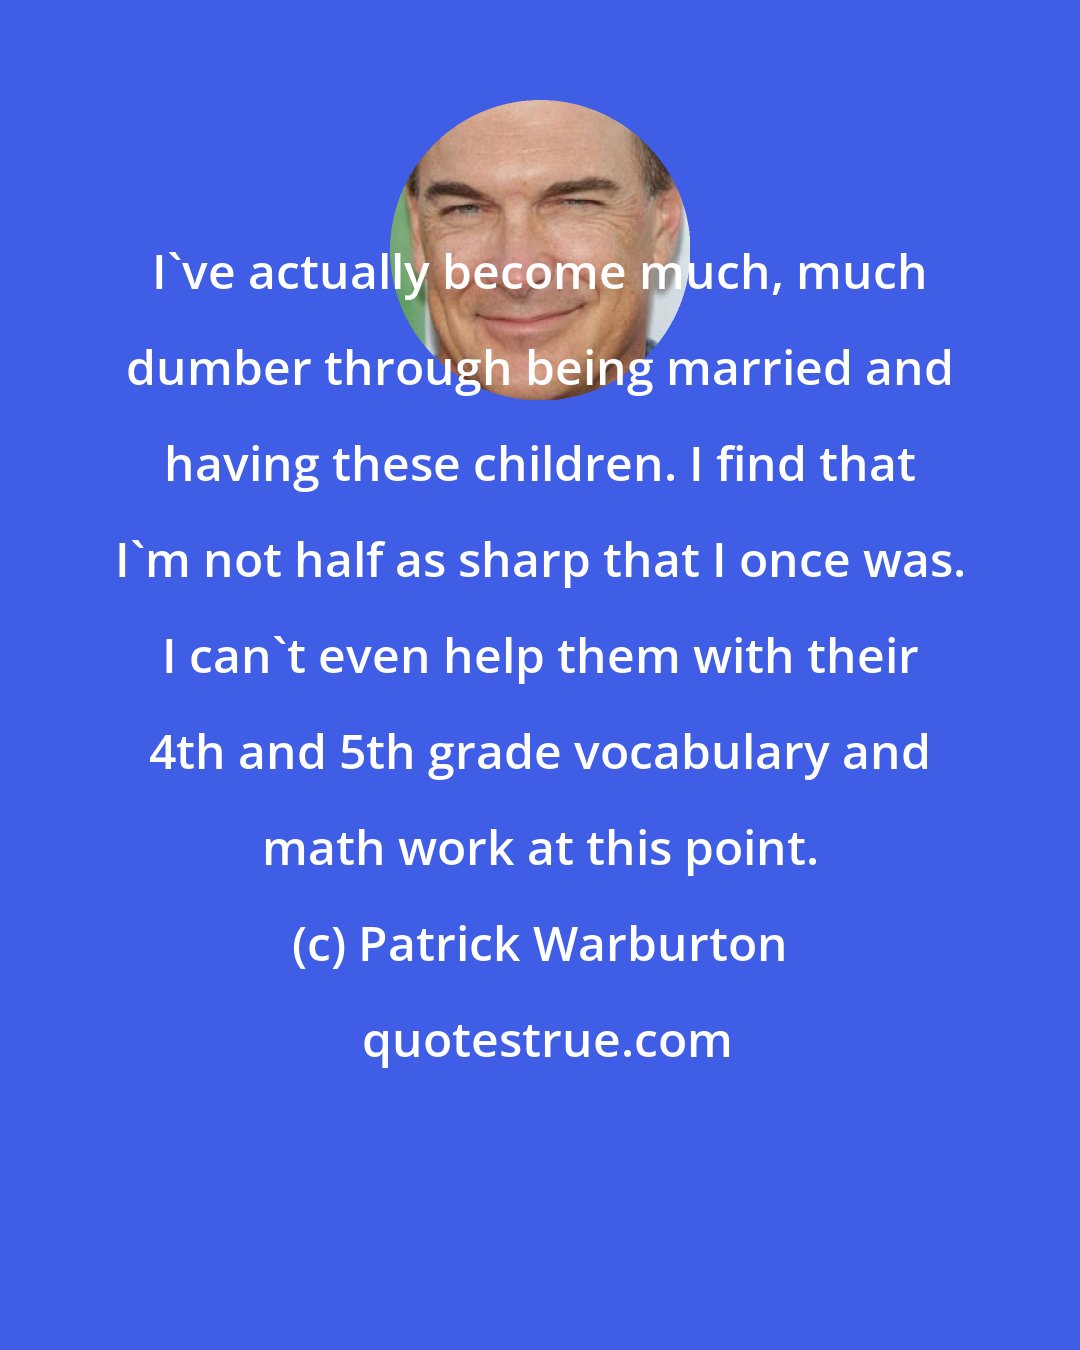 Patrick Warburton: I've actually become much, much dumber through being married and having these children. I find that I'm not half as sharp that I once was. I can't even help them with their 4th and 5th grade vocabulary and math work at this point.